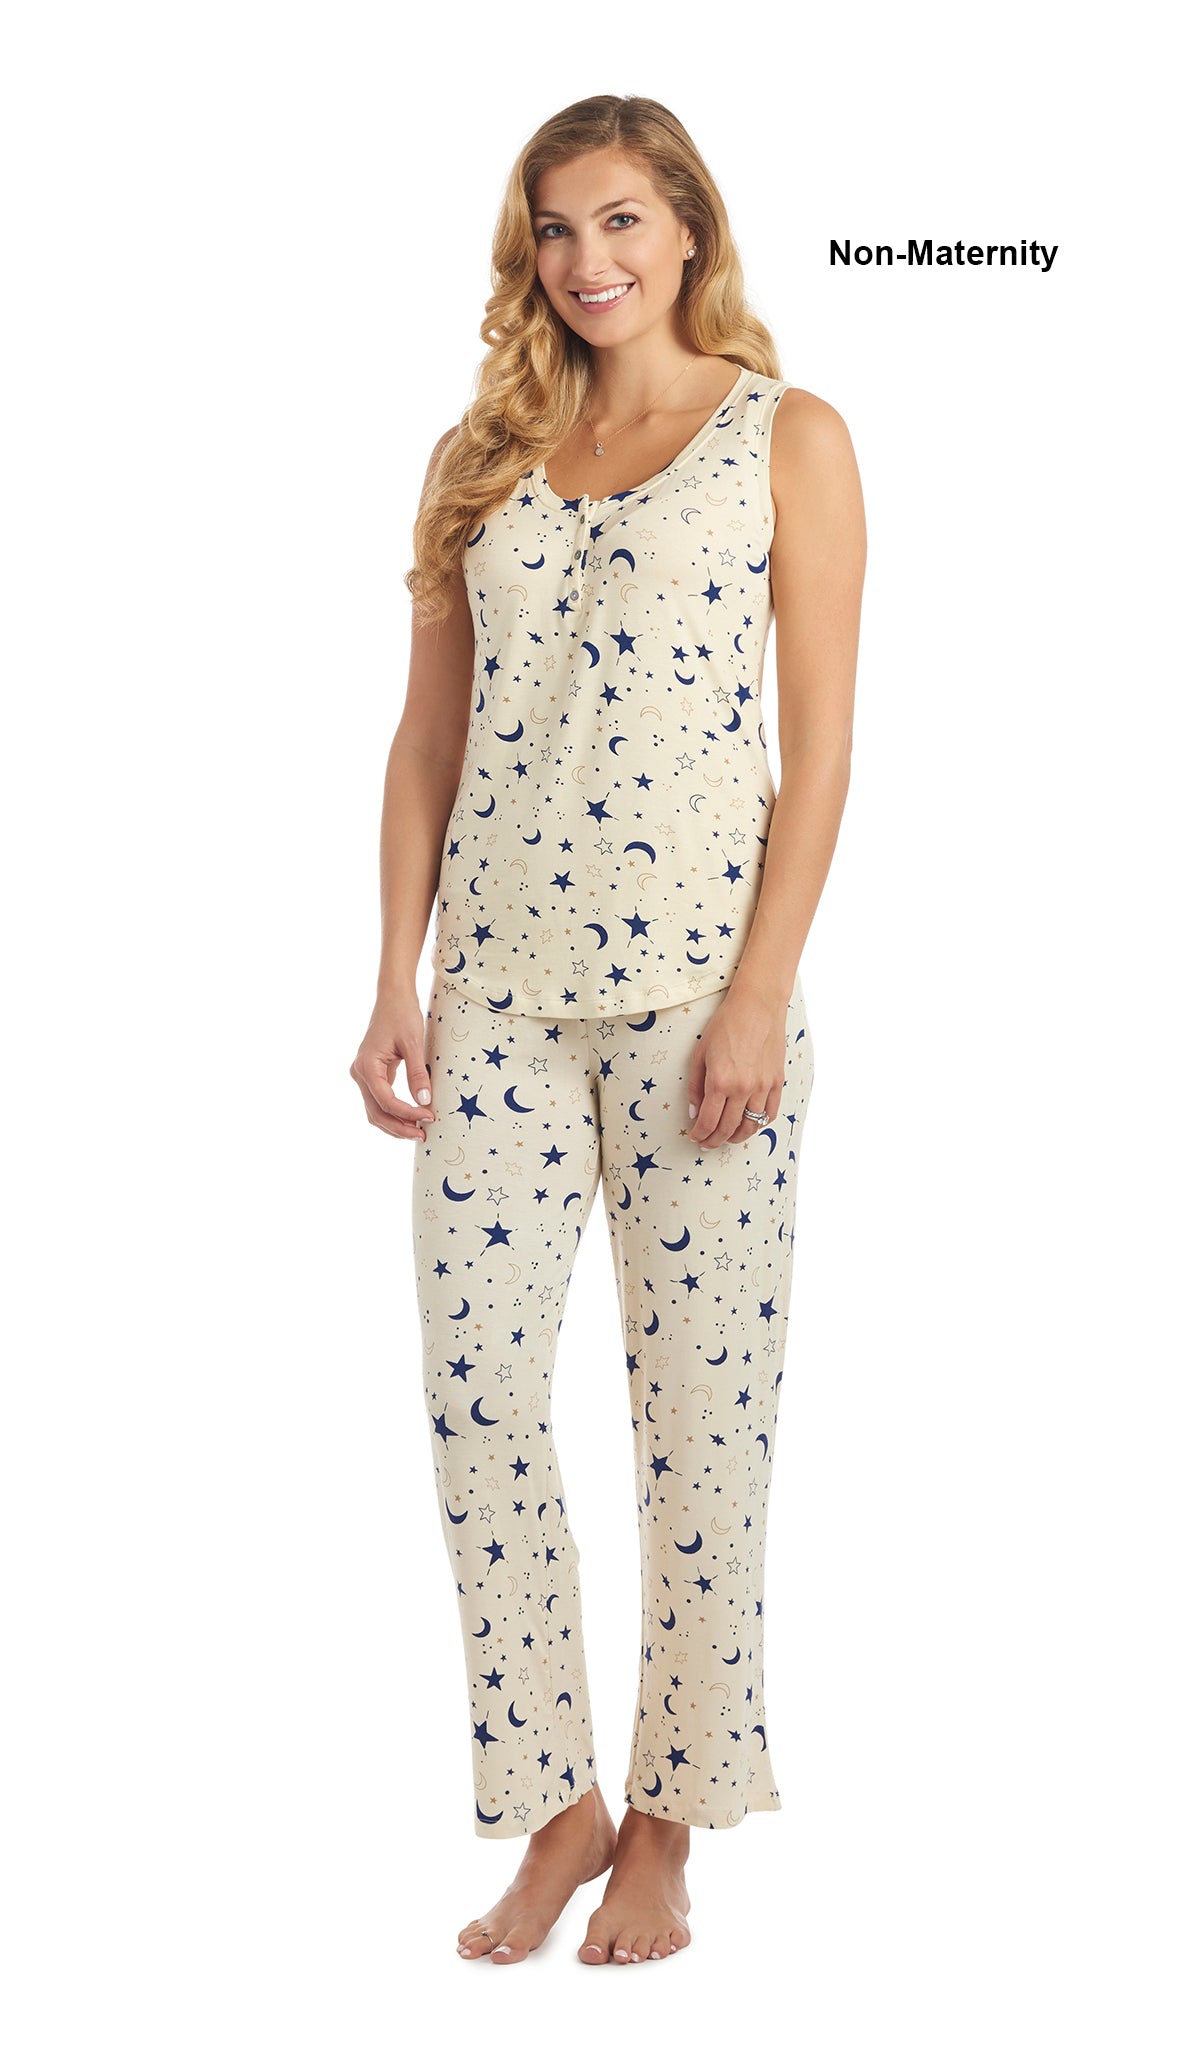 Twinkle Joy 2-Piece Set. Woman wearing button front placket tank top and pant as non-maternity.